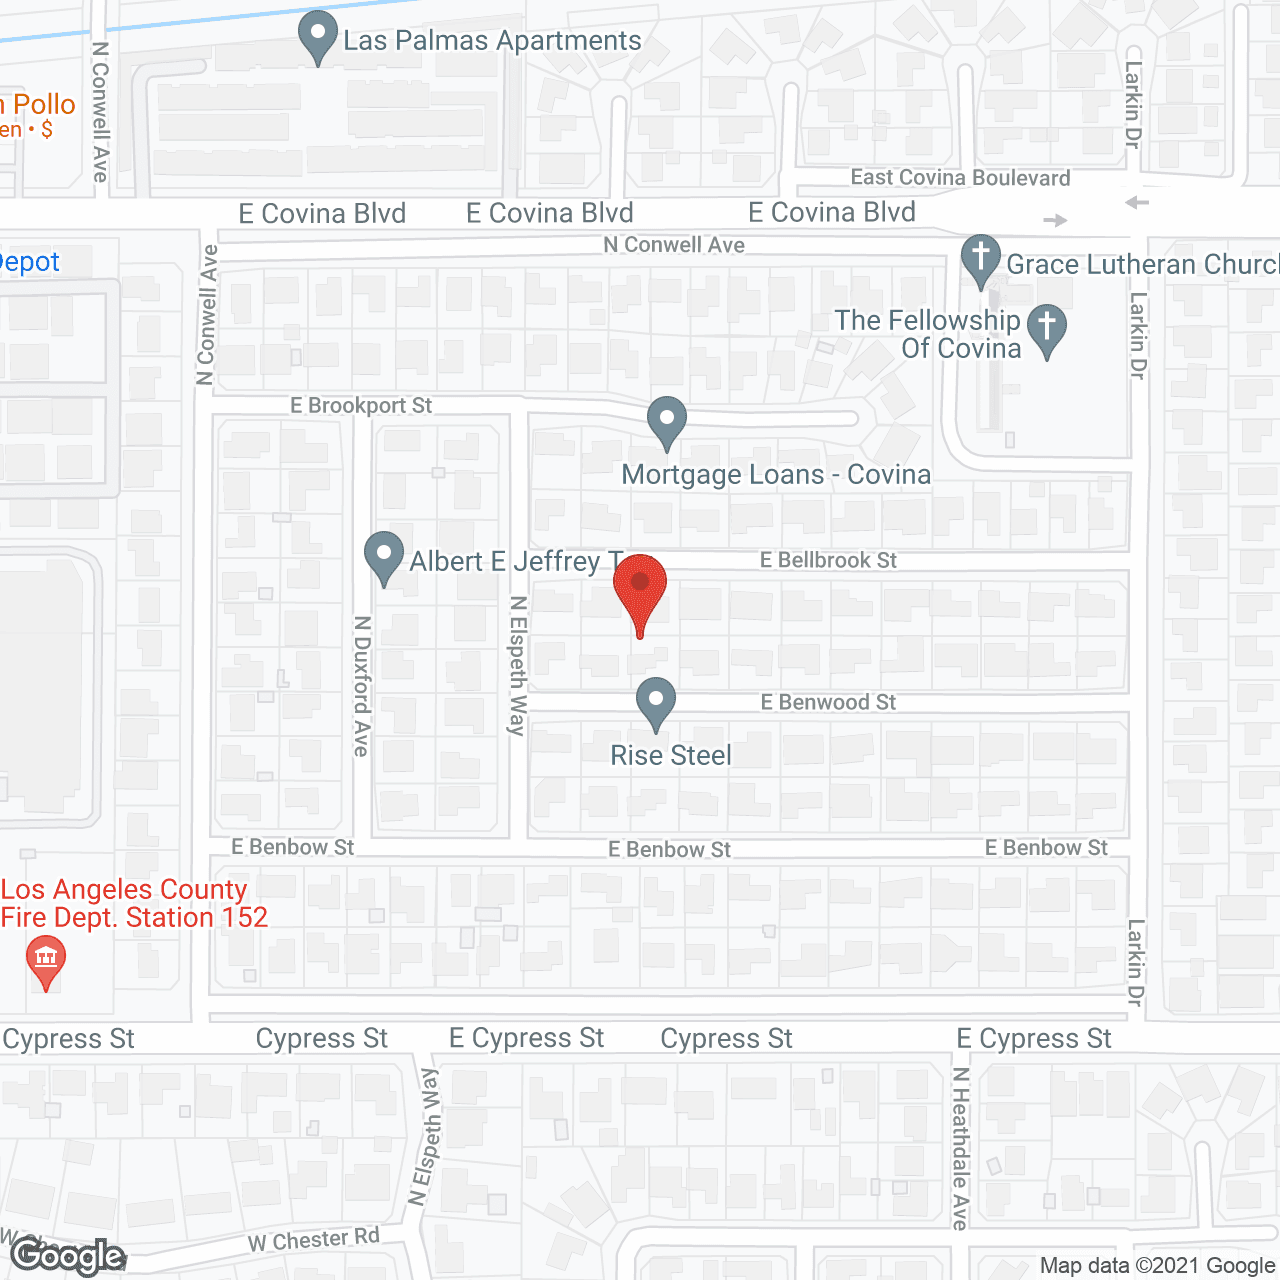 A Faithful Home of Covina in google map